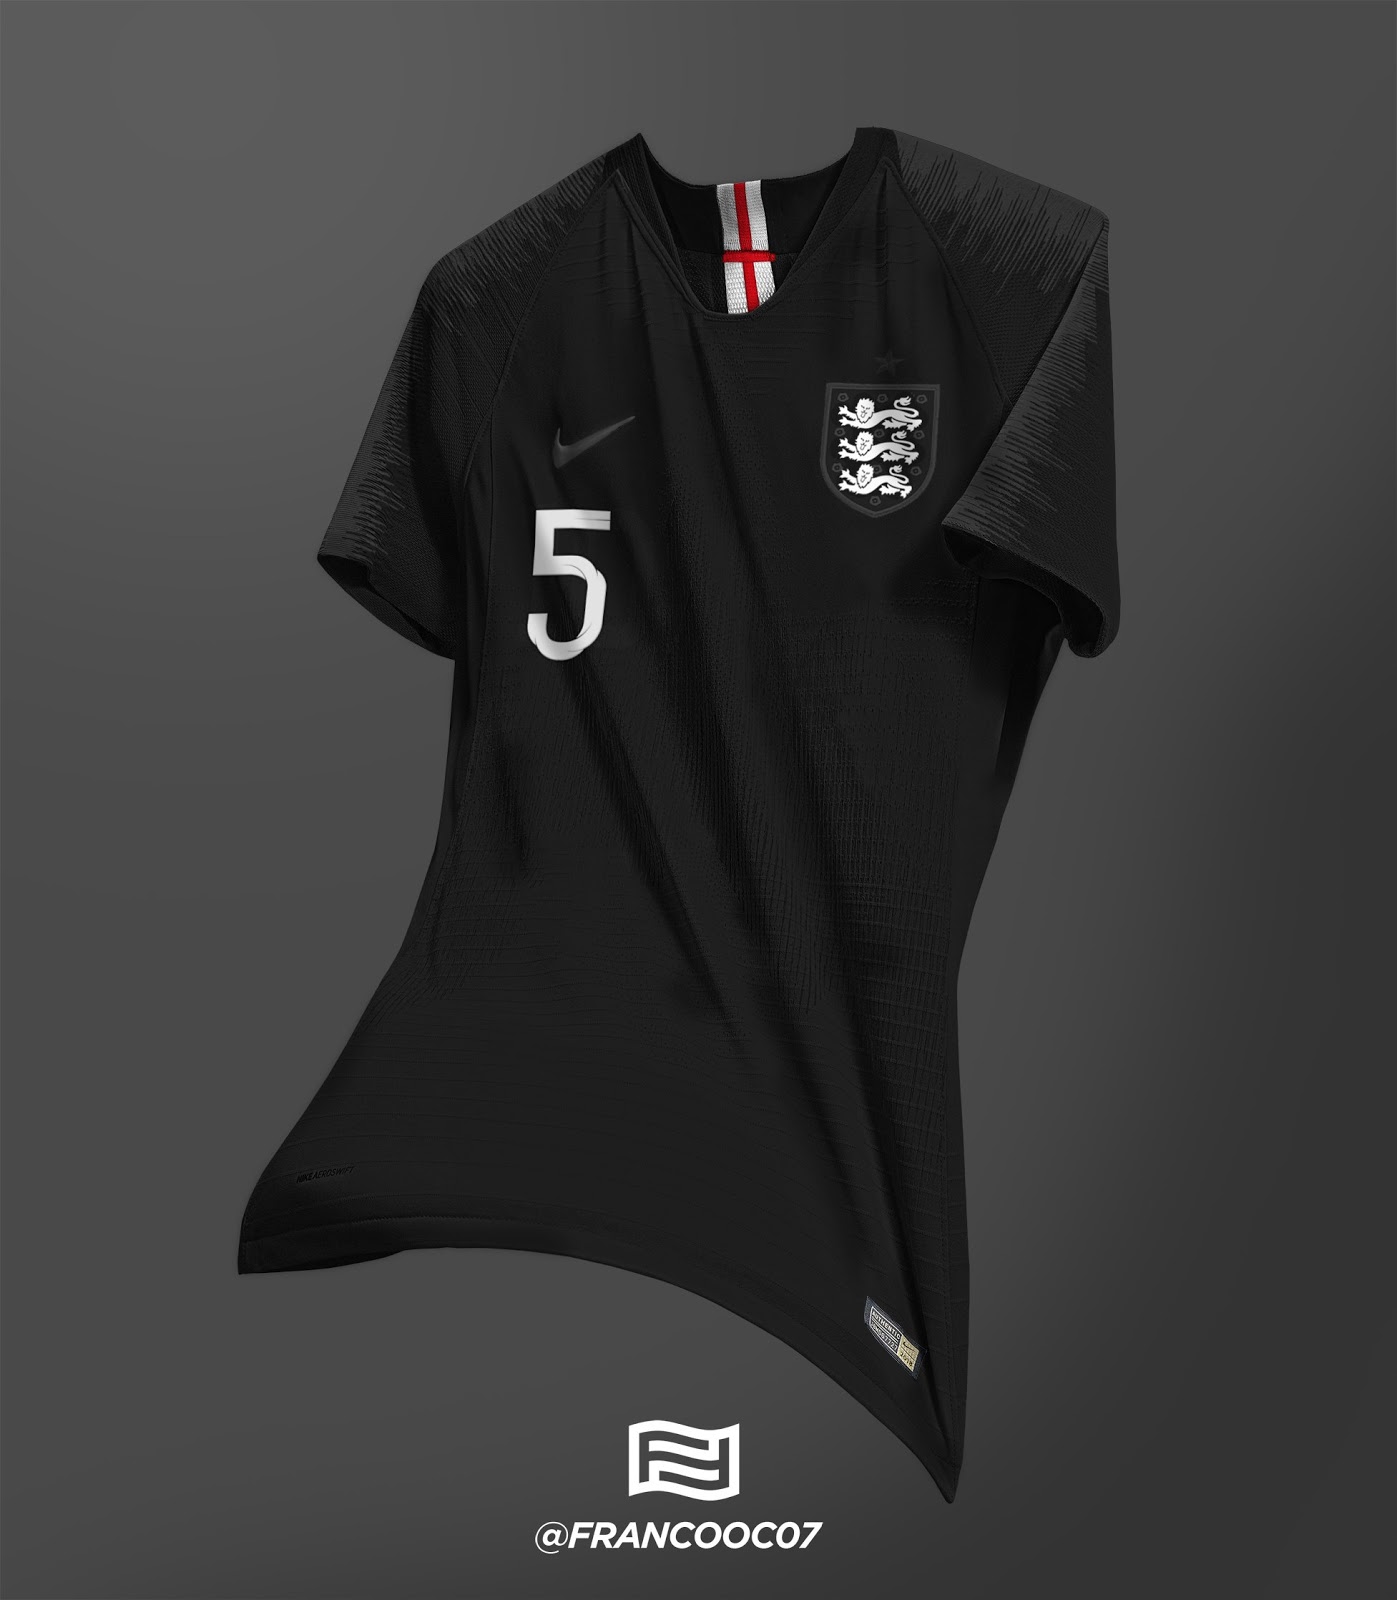 Download What If? Black Nike England 2018 Concept Kit by Franco ...